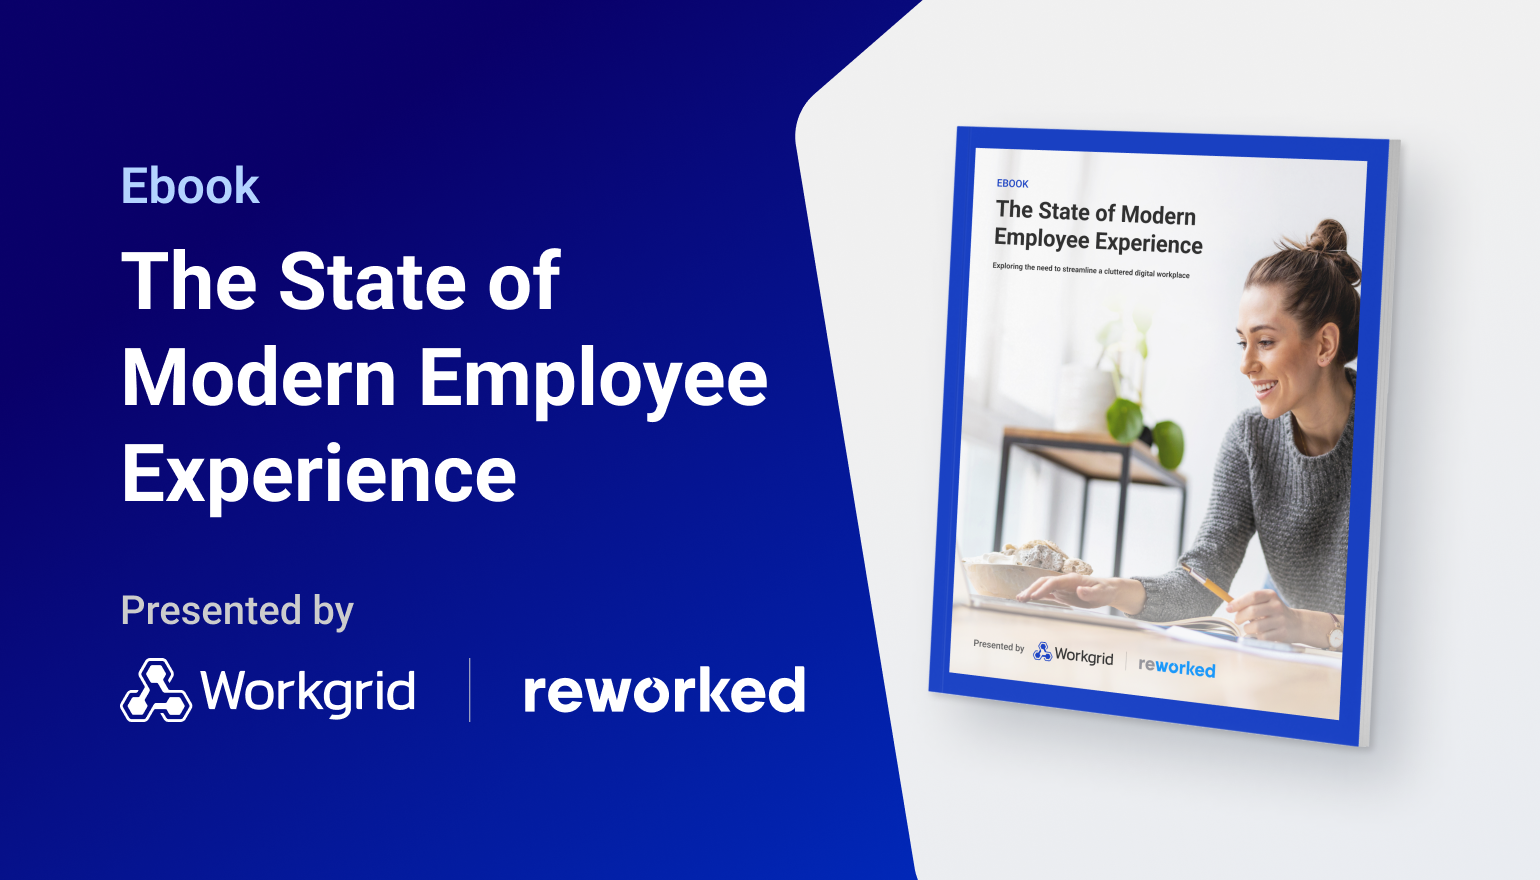 The state of the modern employee experience research report conducted by ReWorked and Workgrid